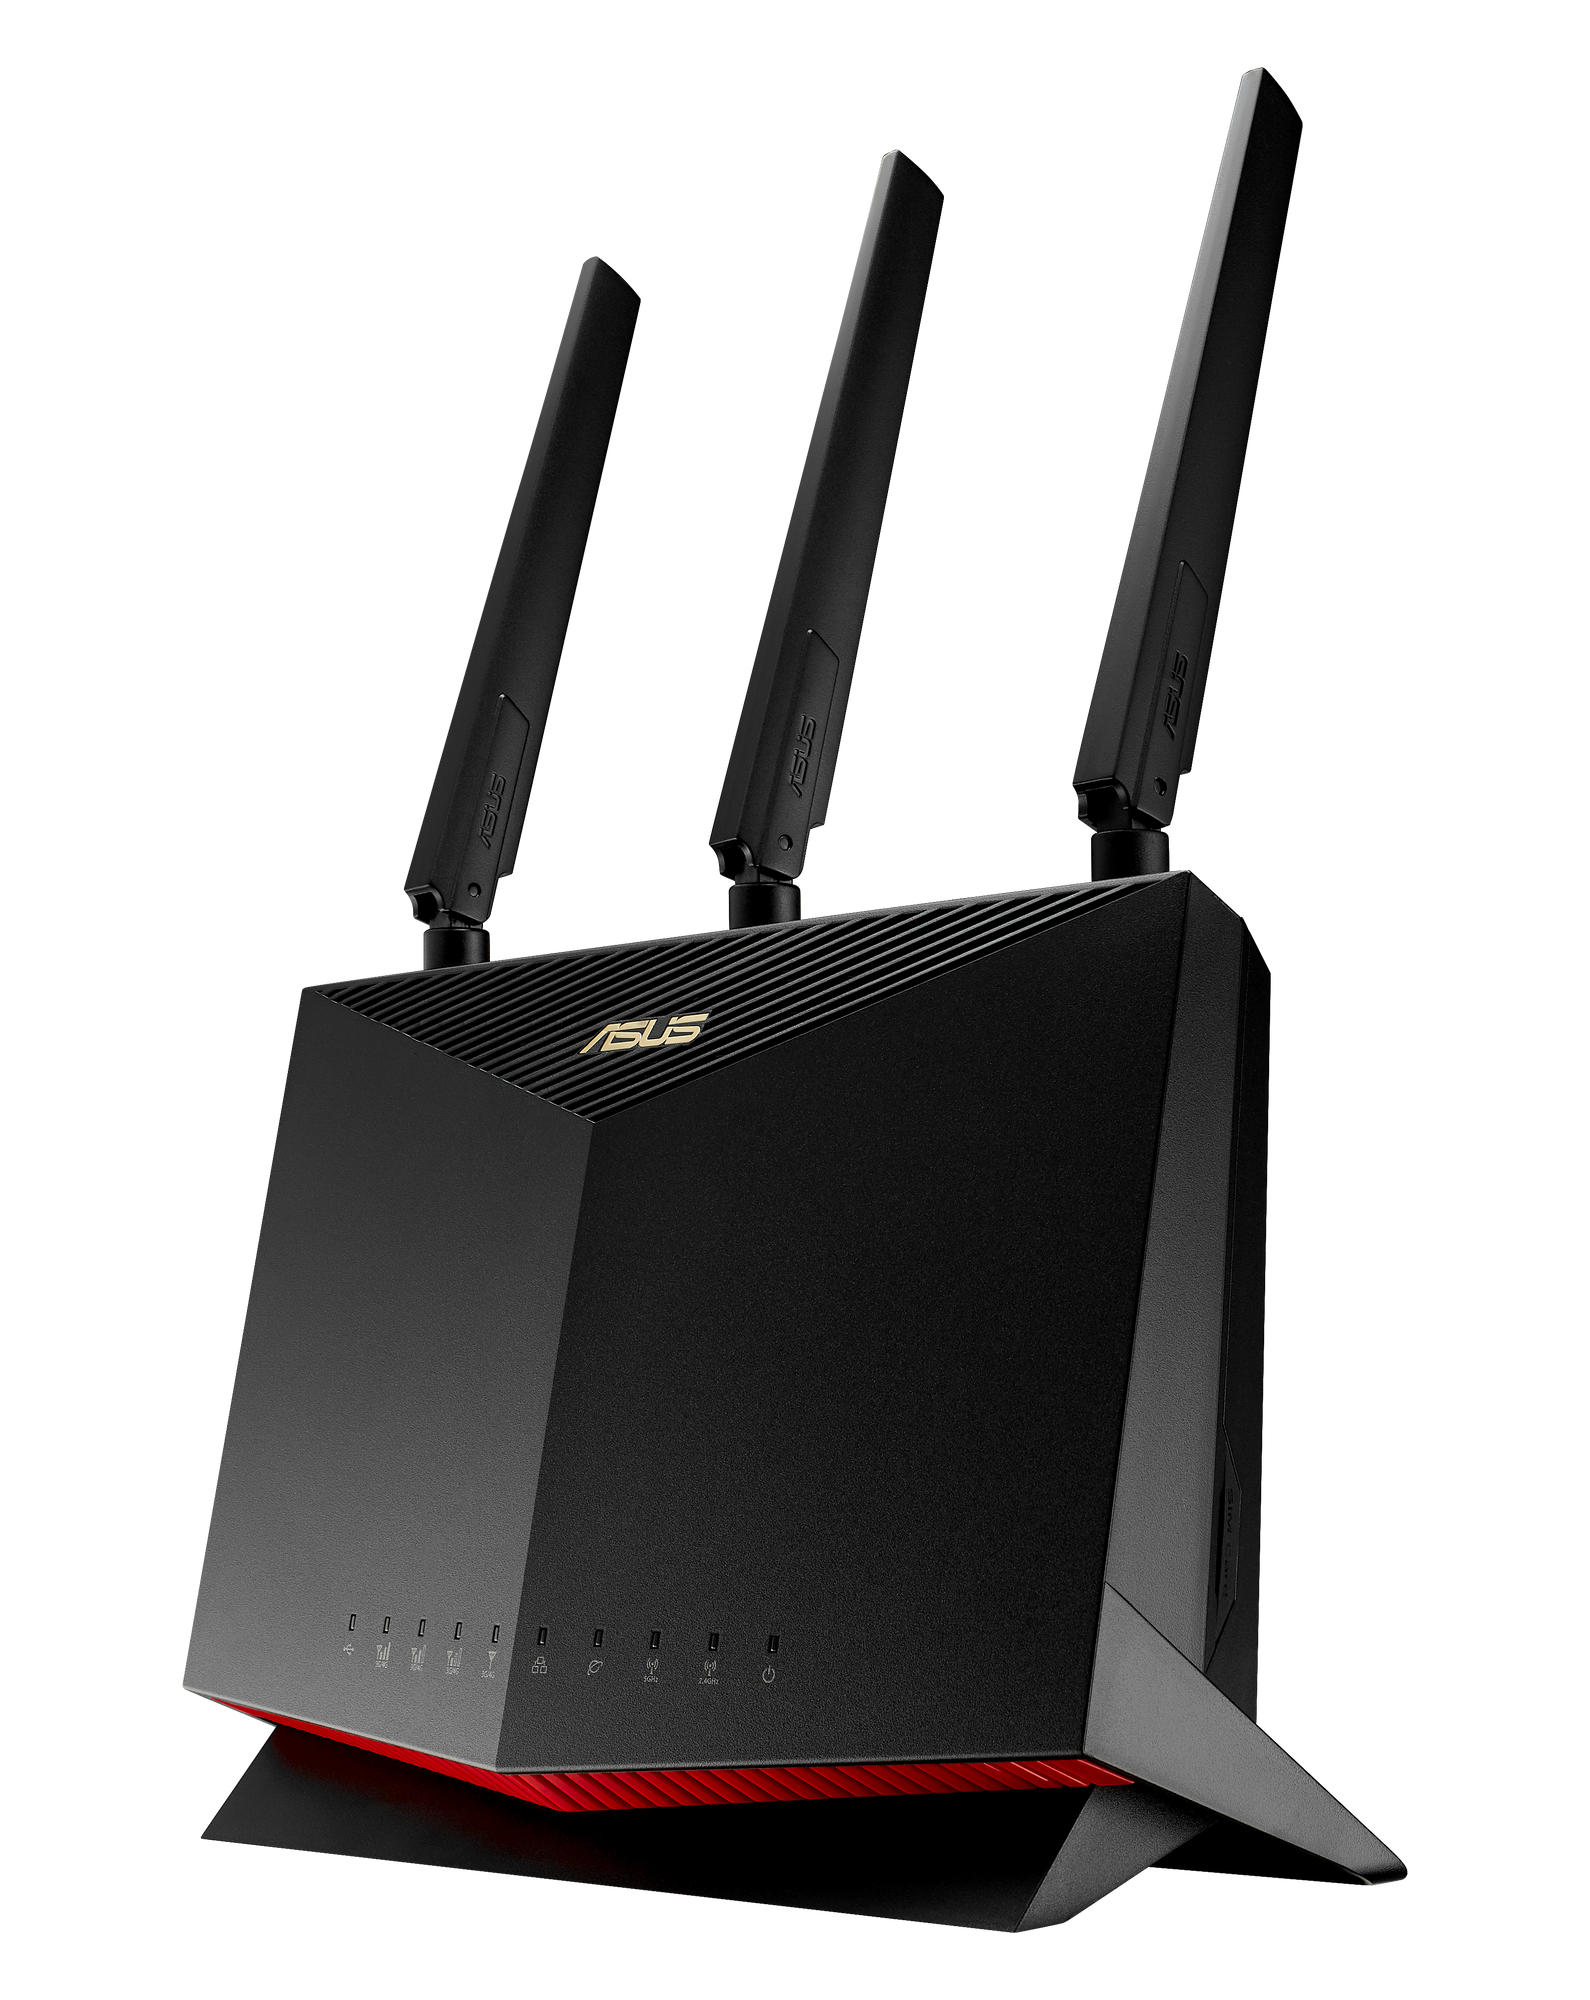 B-WARE ASUS 4G-AC86U Cat. 12 600 Mbit/s Dual-Band AC2600 LTE Modem Router  [refurbished] 1